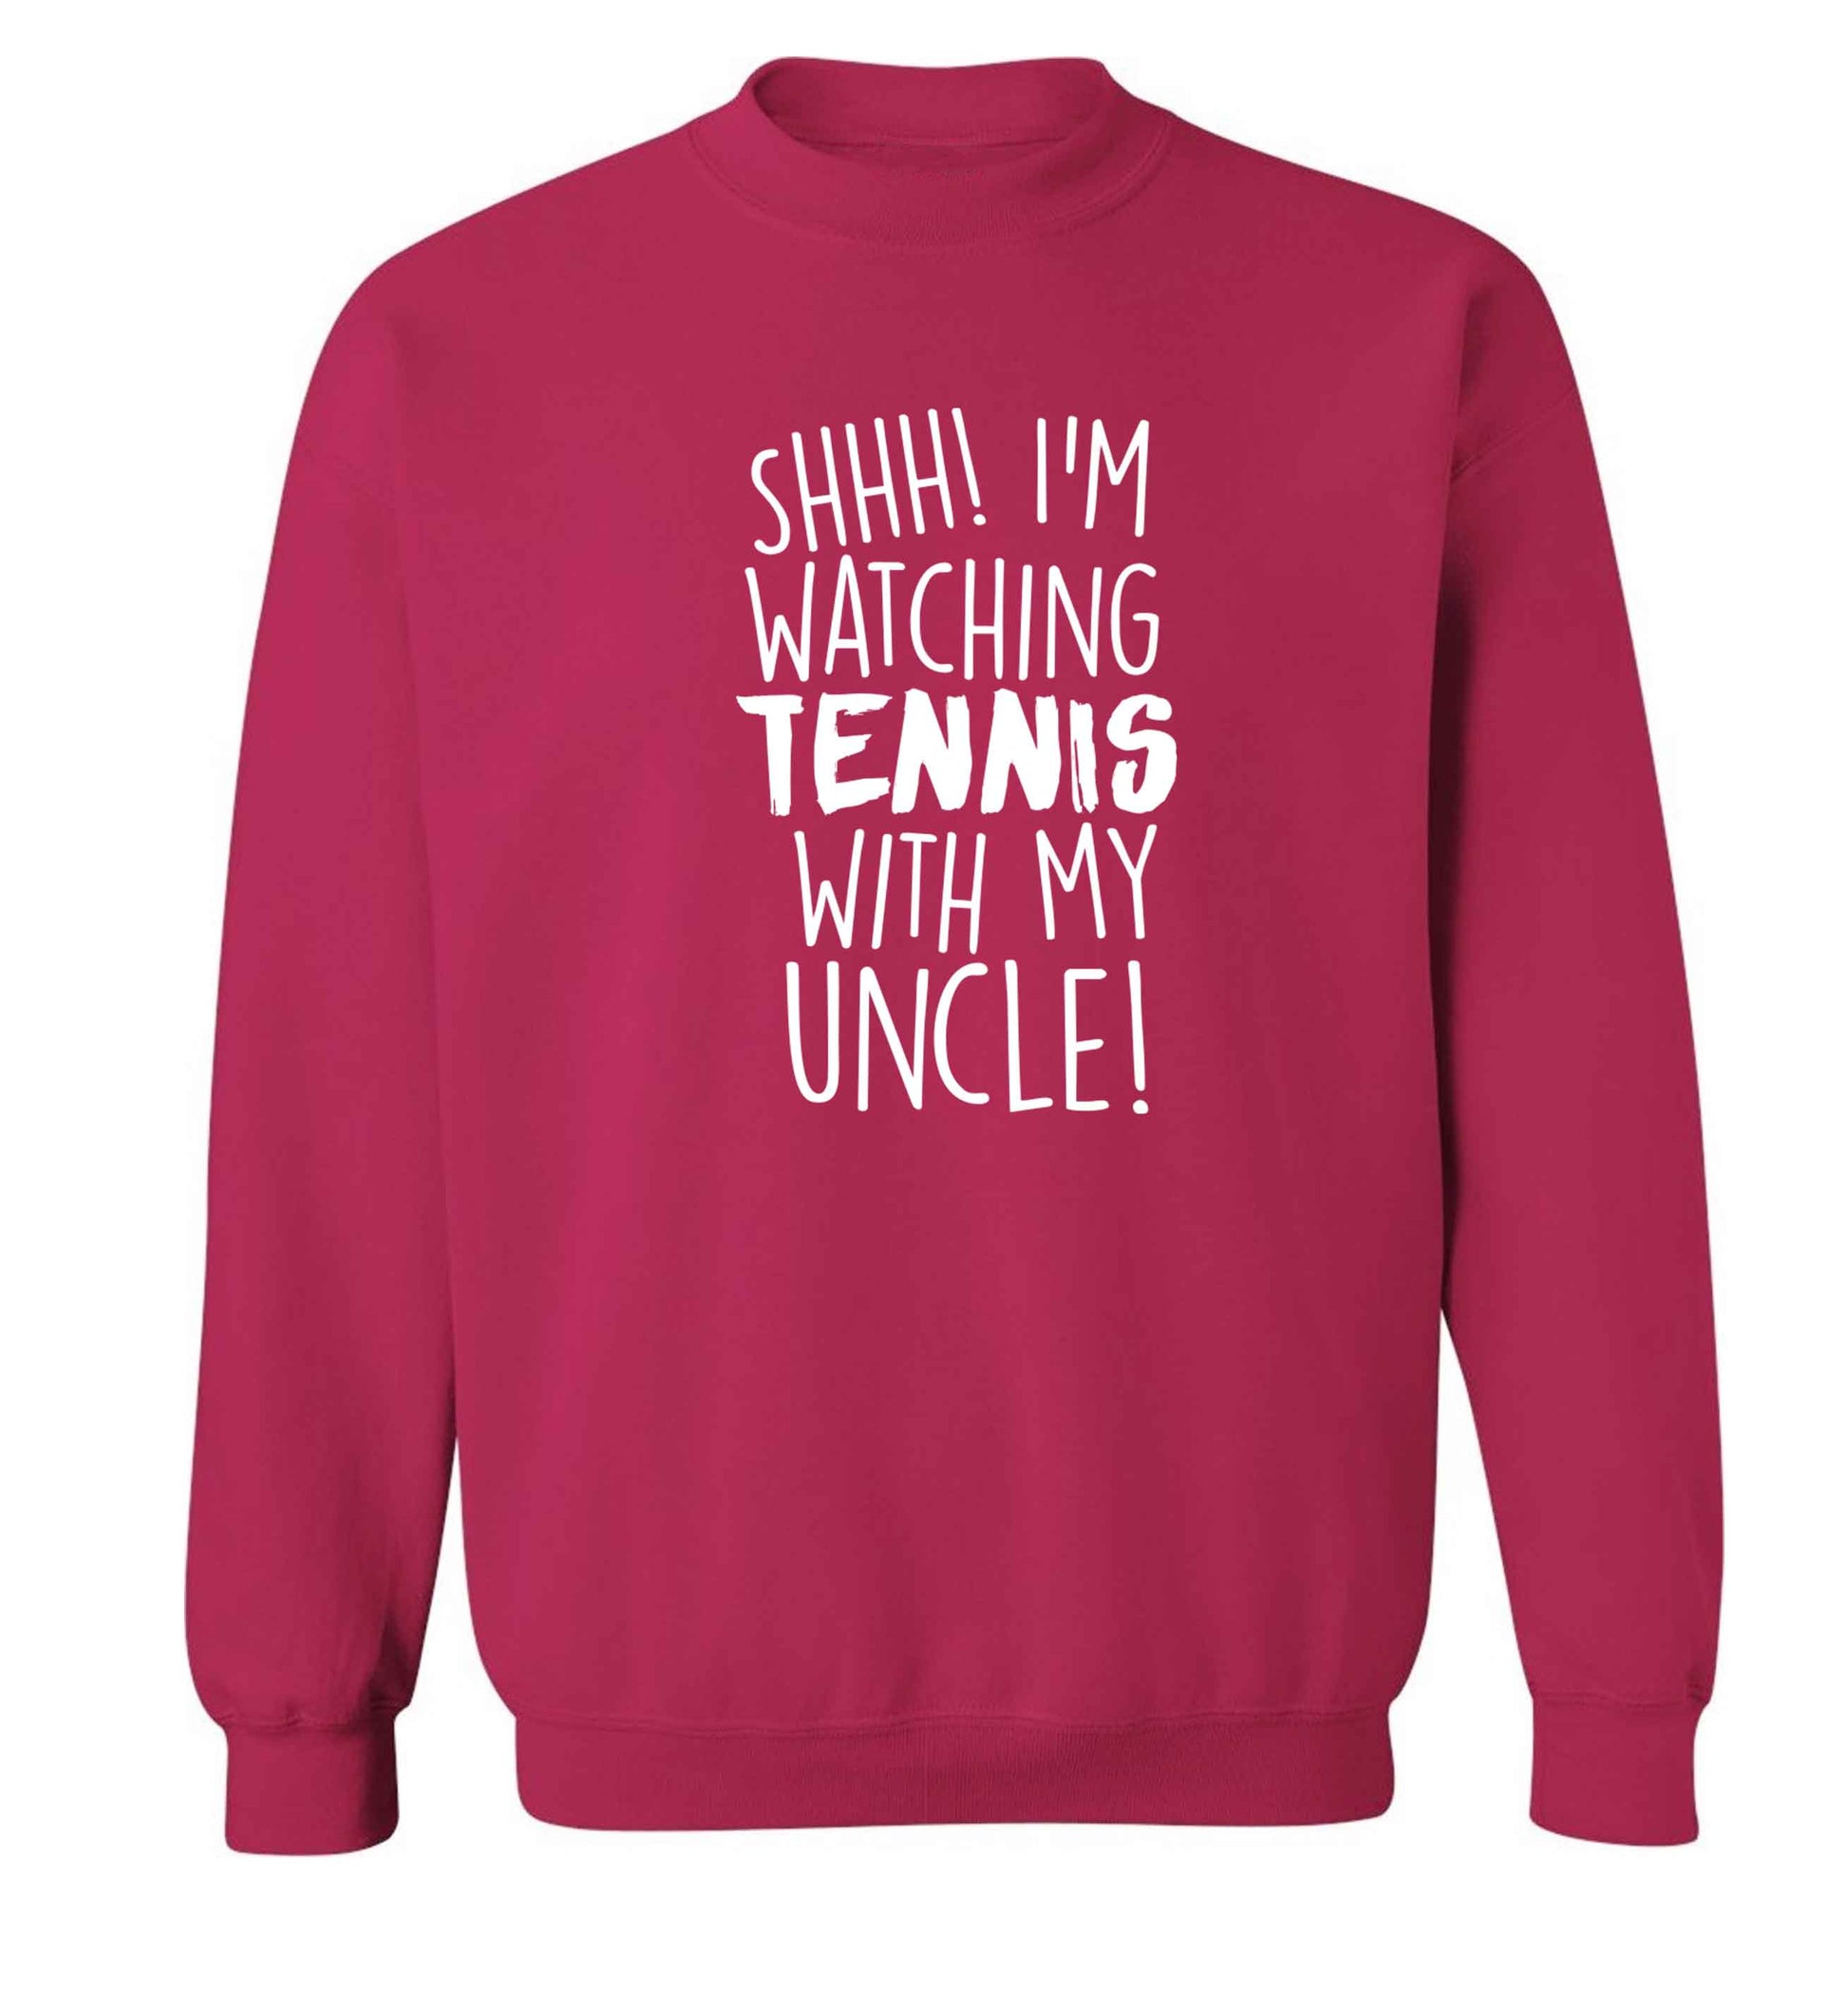 Shh! I'm watching tennis with my uncle! Adult's unisex pink Sweater 2XL